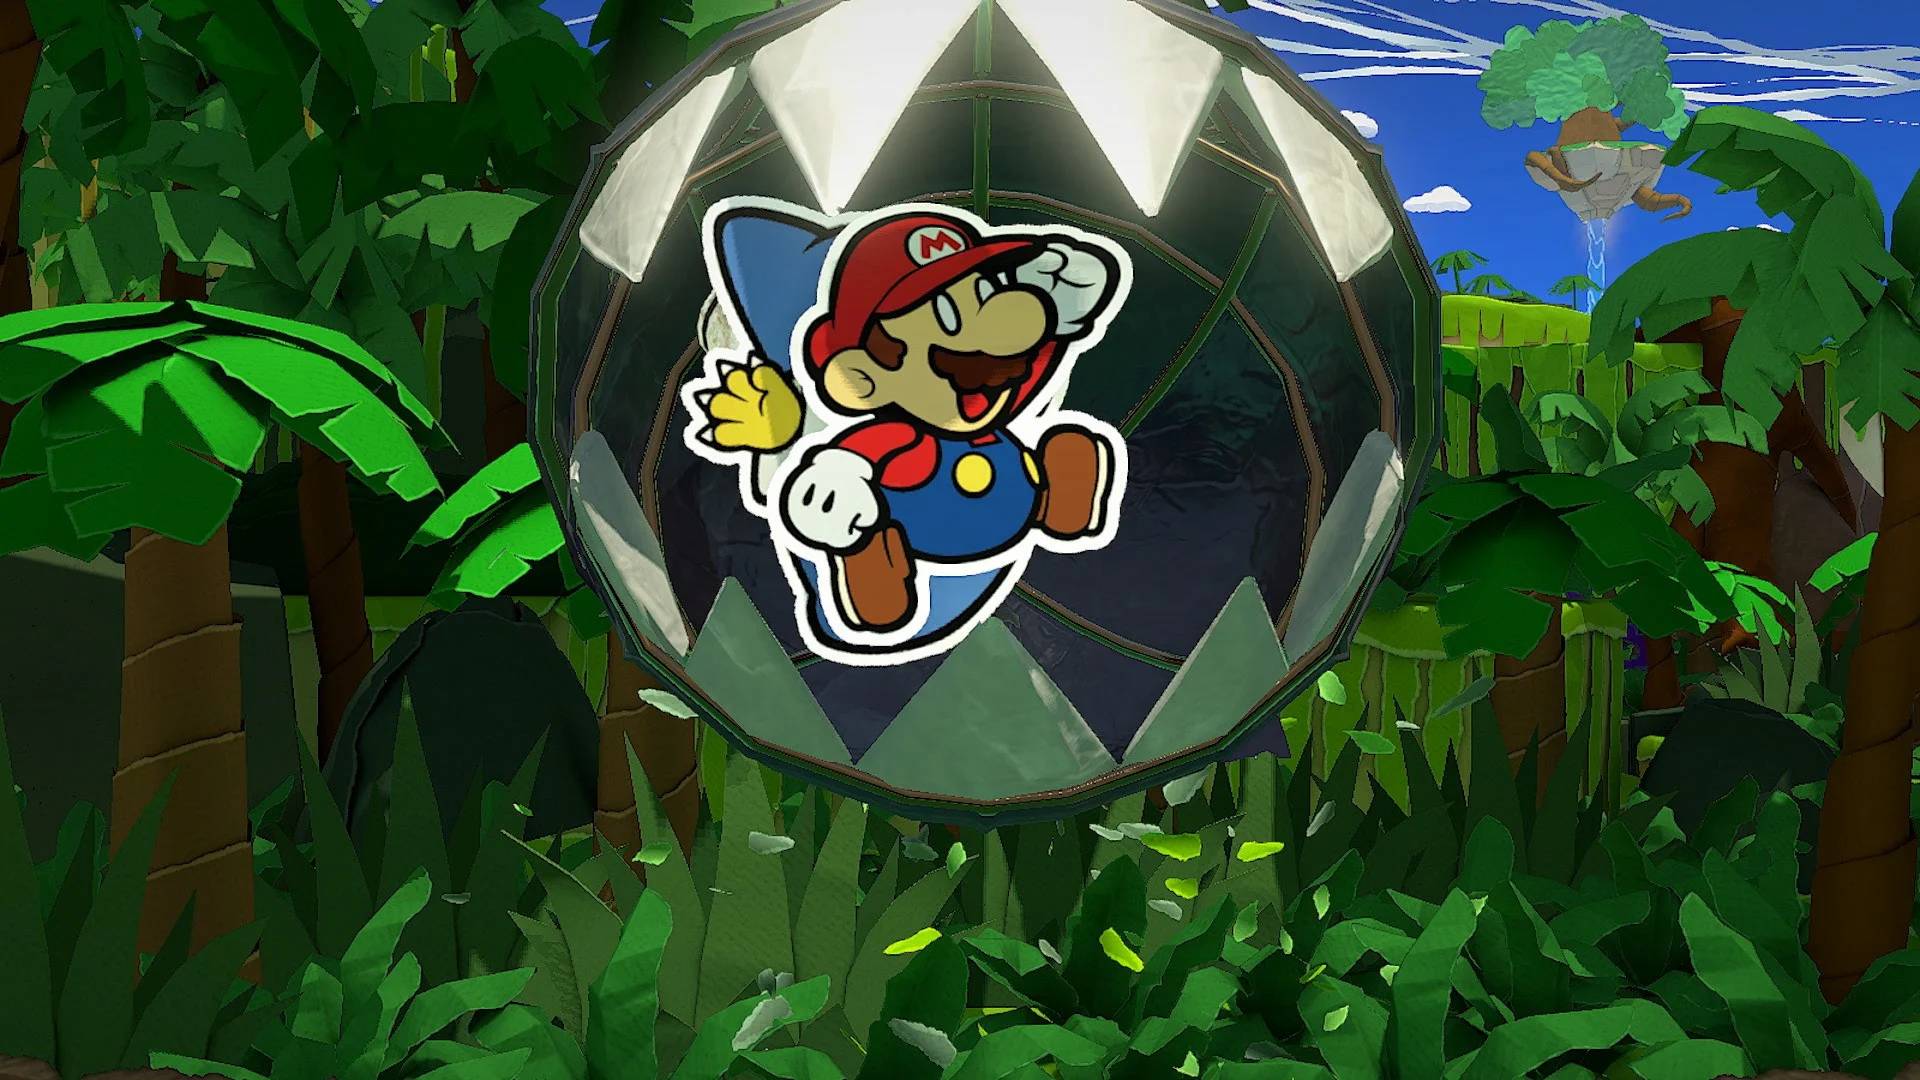 Funny games: Paper Mario and Paper Kami leap into the air but are about to be swallowed by a chain chomp